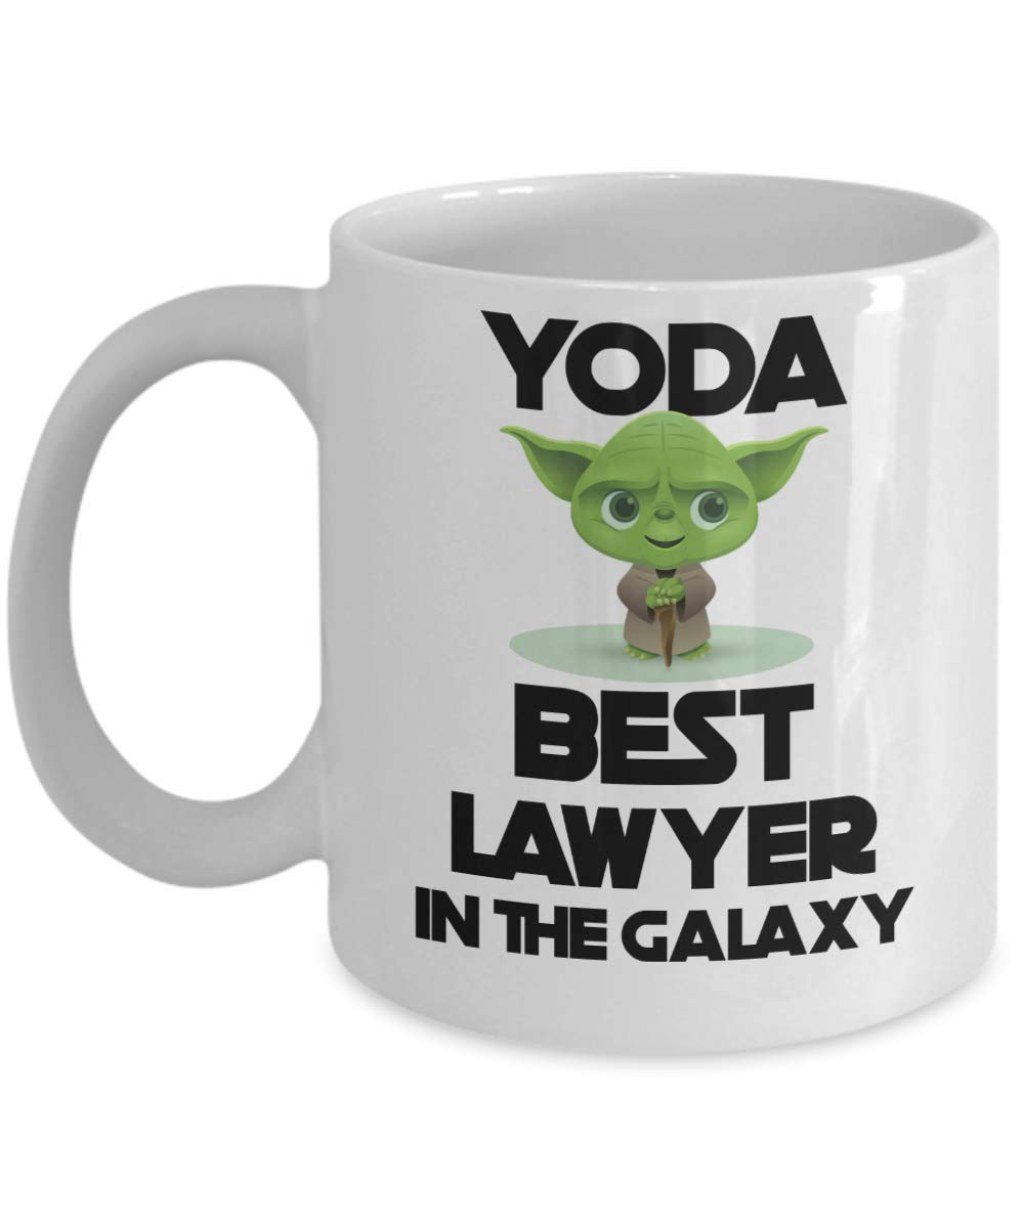 Picture of: Yoda Best Lawyer In The Galaxy Mug for Dad Retirement Gift for Attorney  Graduation Gift for Future Lawyer Law School Graduate Gift for Men and  Women F